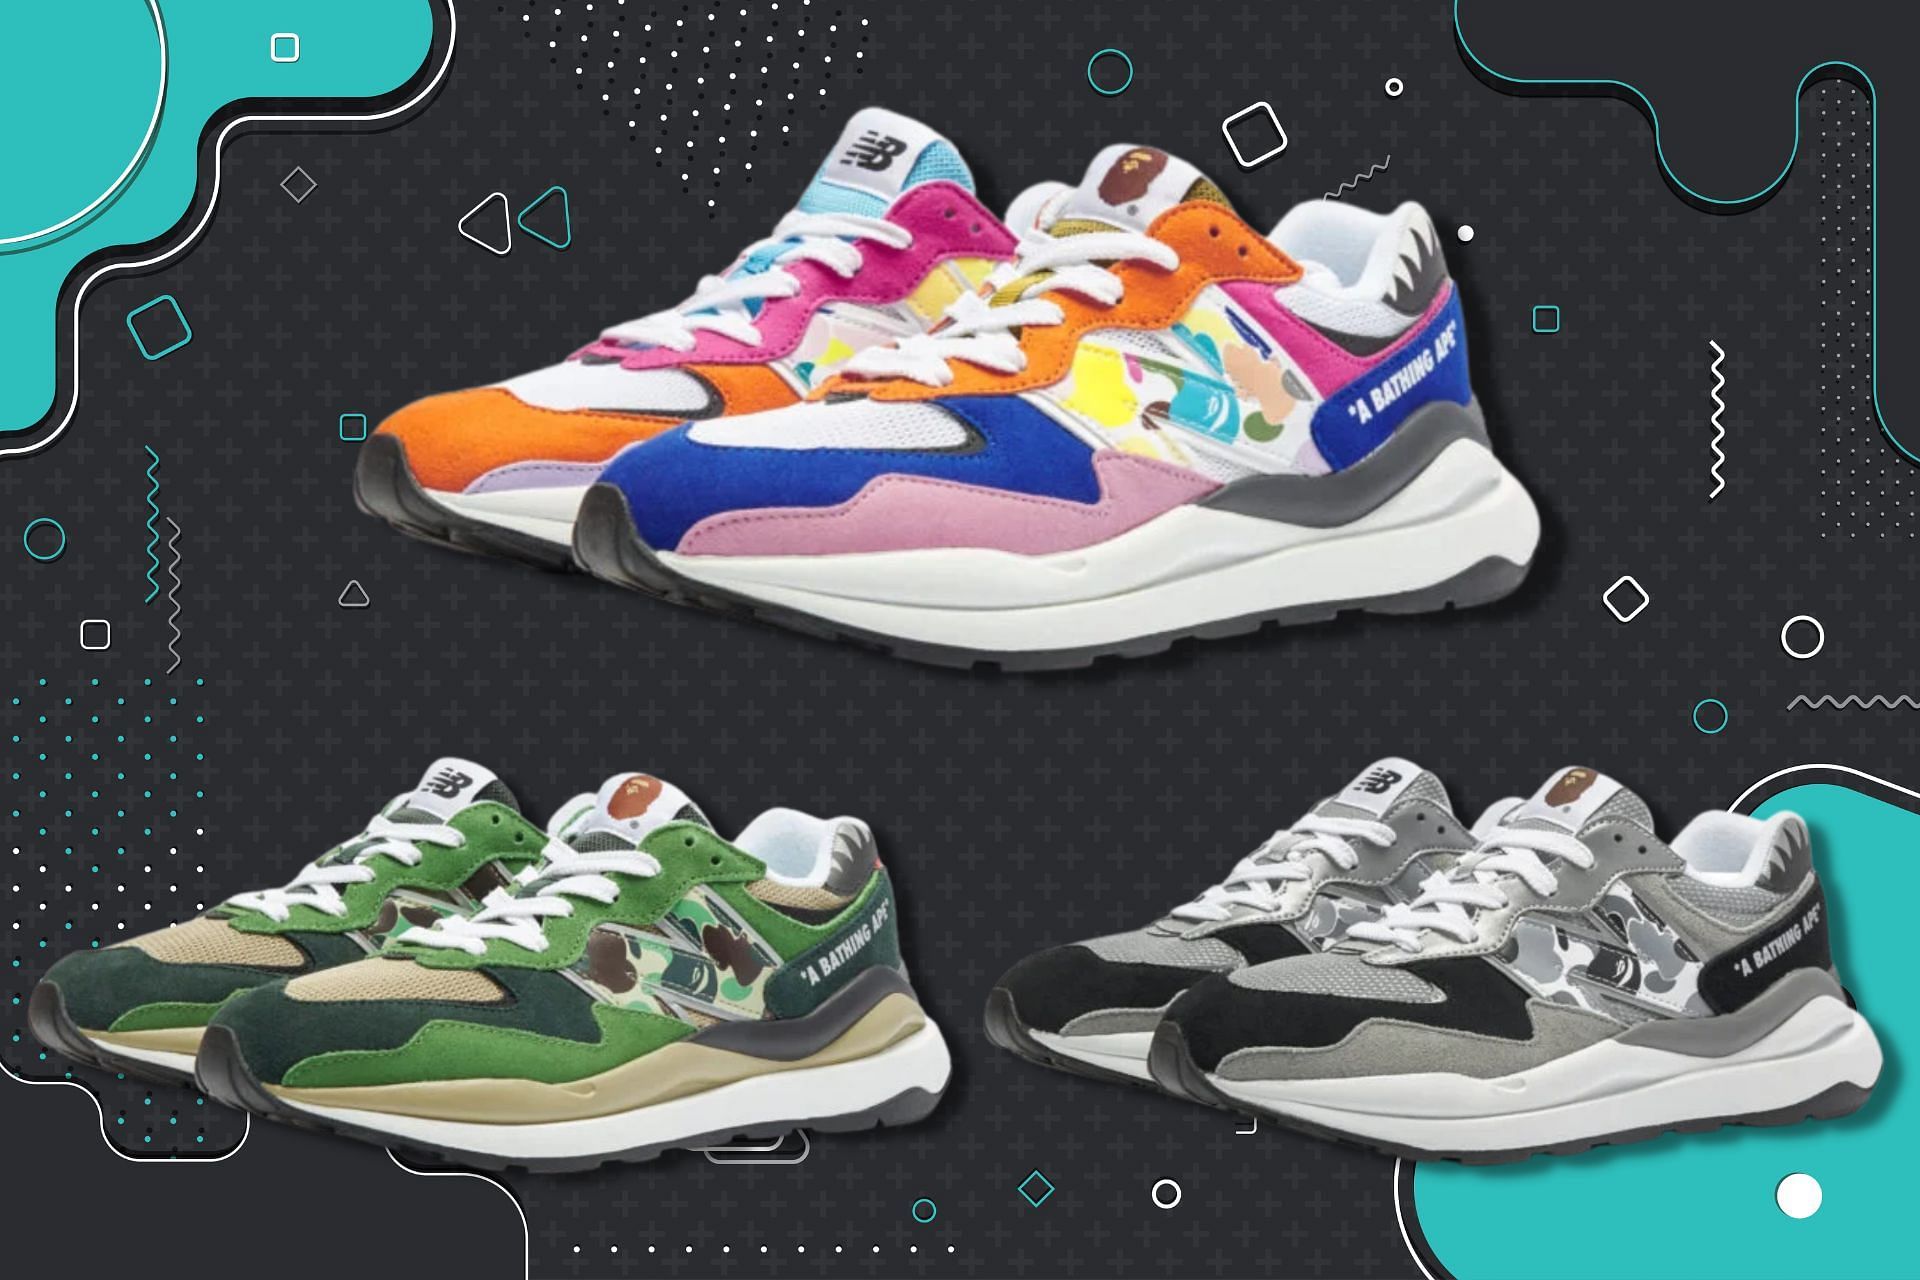 Where to buy BAPE x New Balance collection? Price, release date, and ...